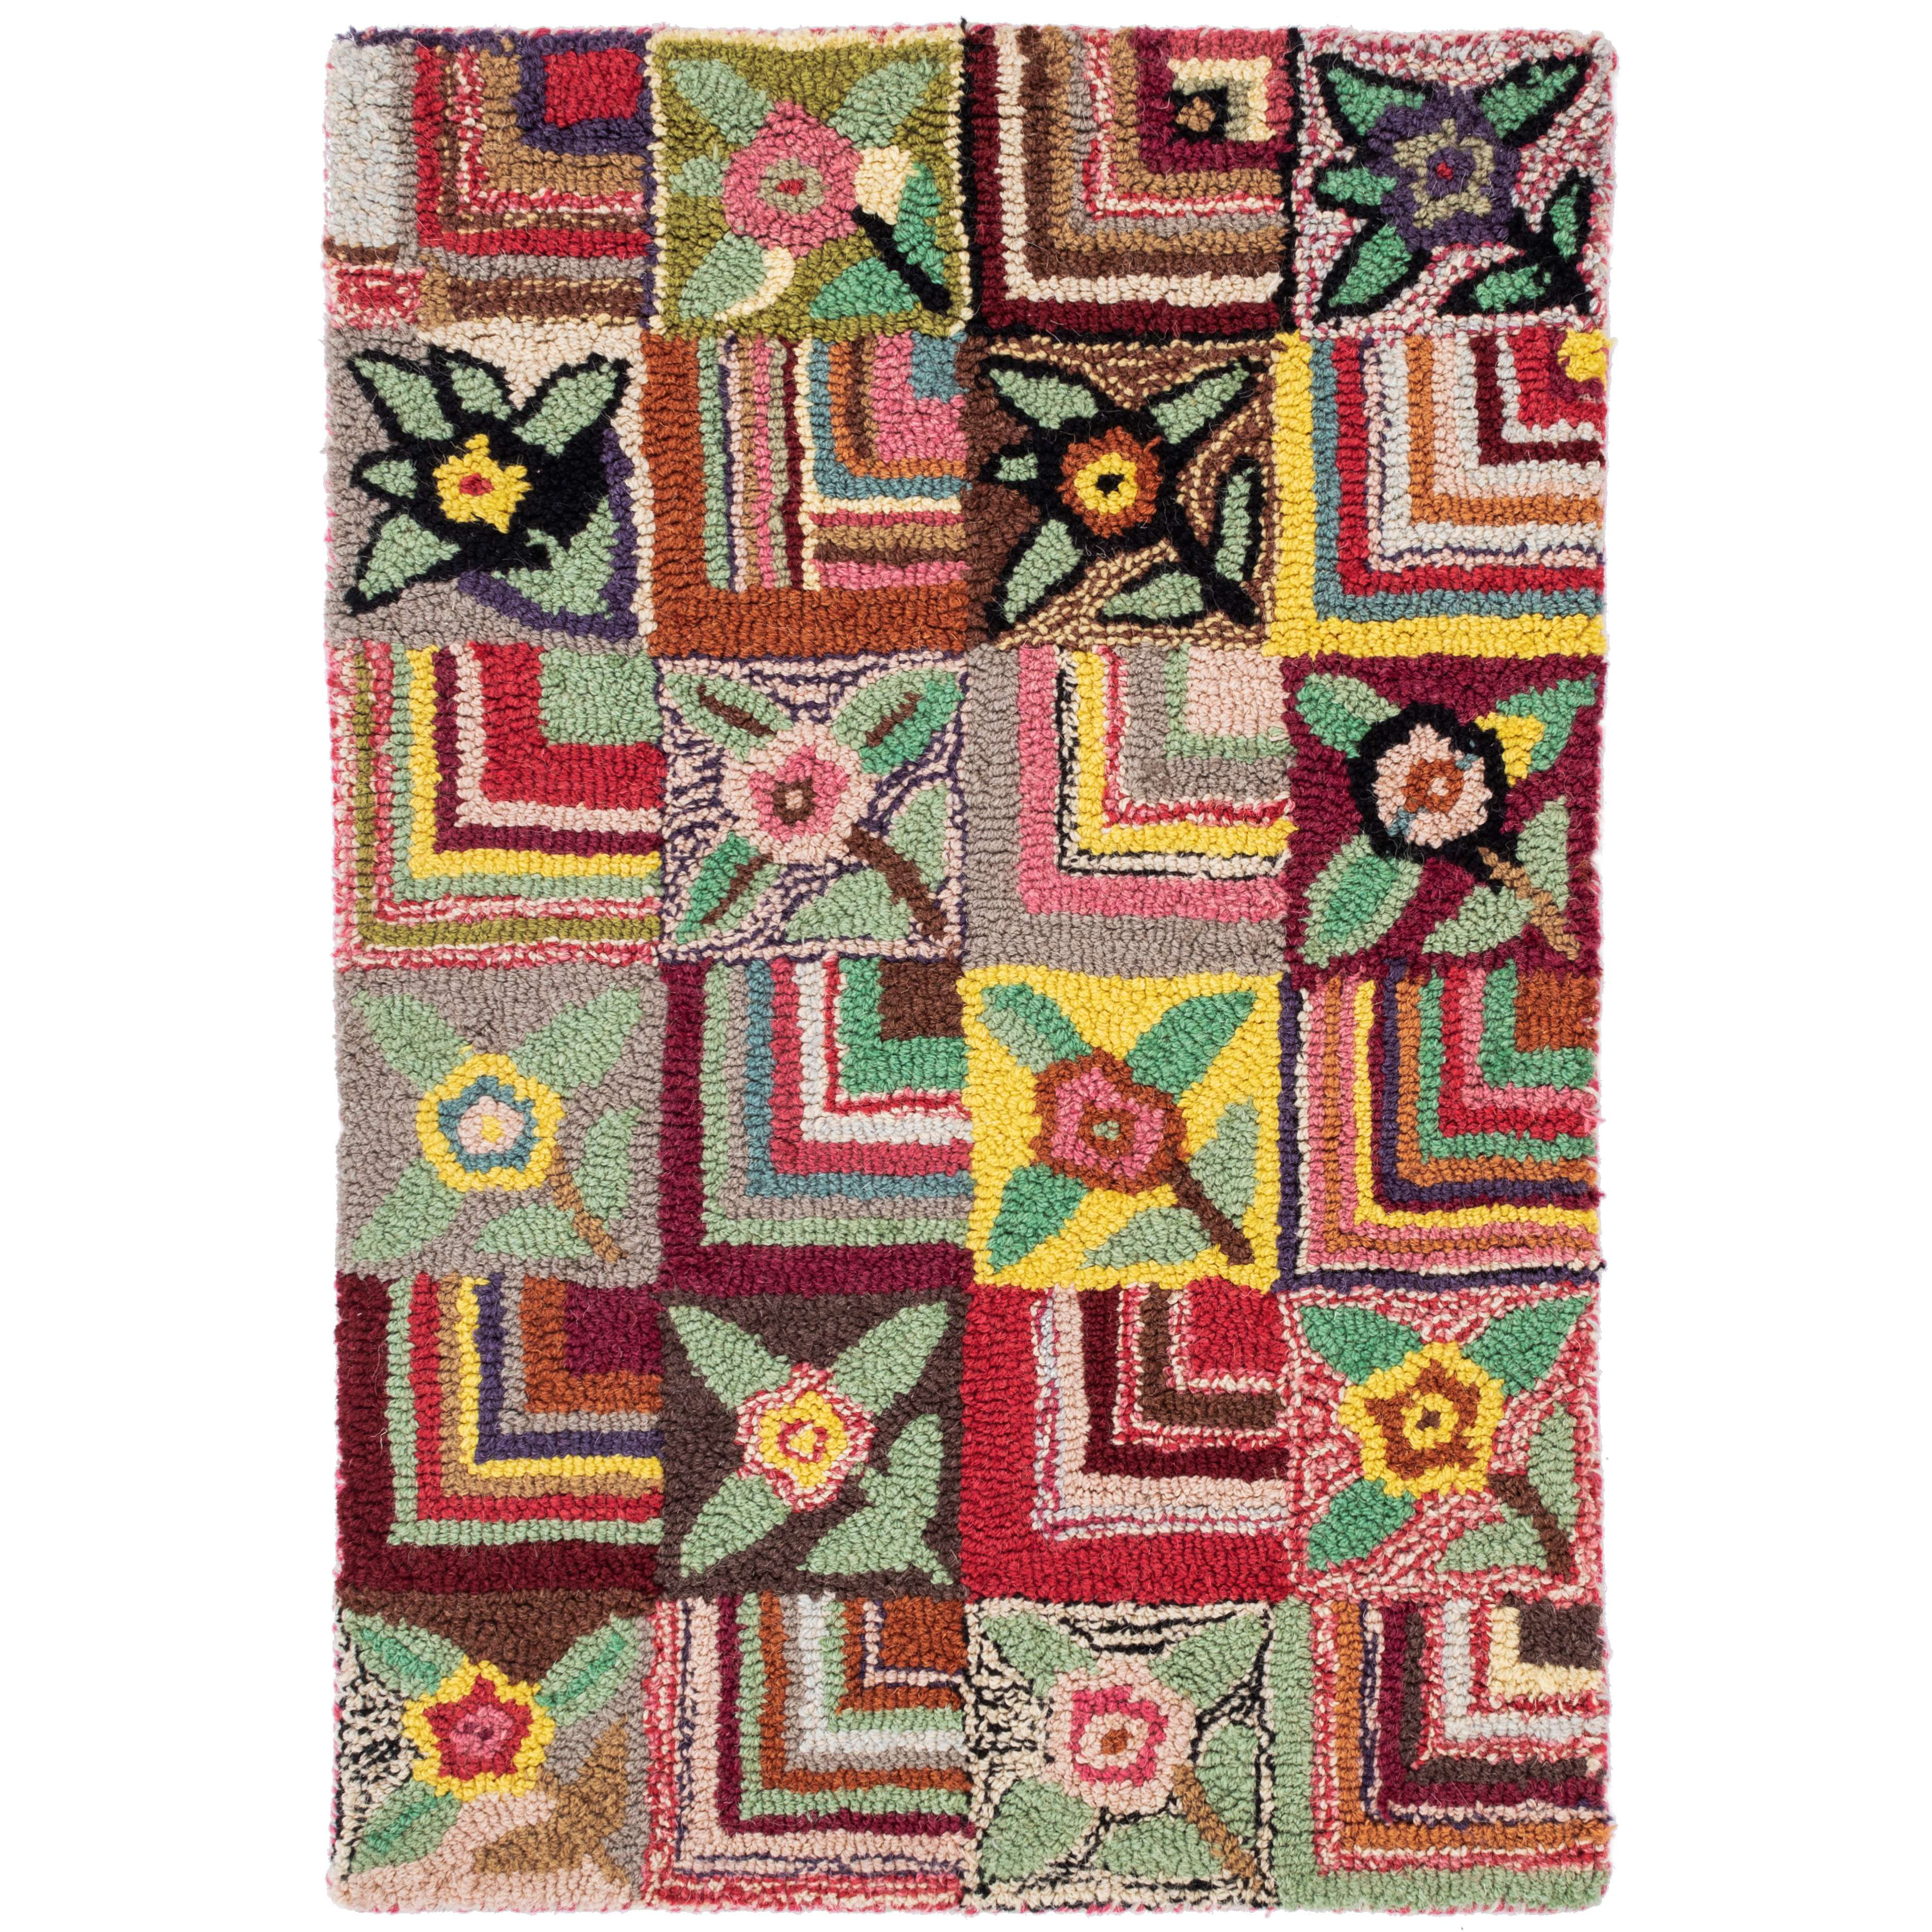 Gypsy Rose Wool Hooked Rug By Dash